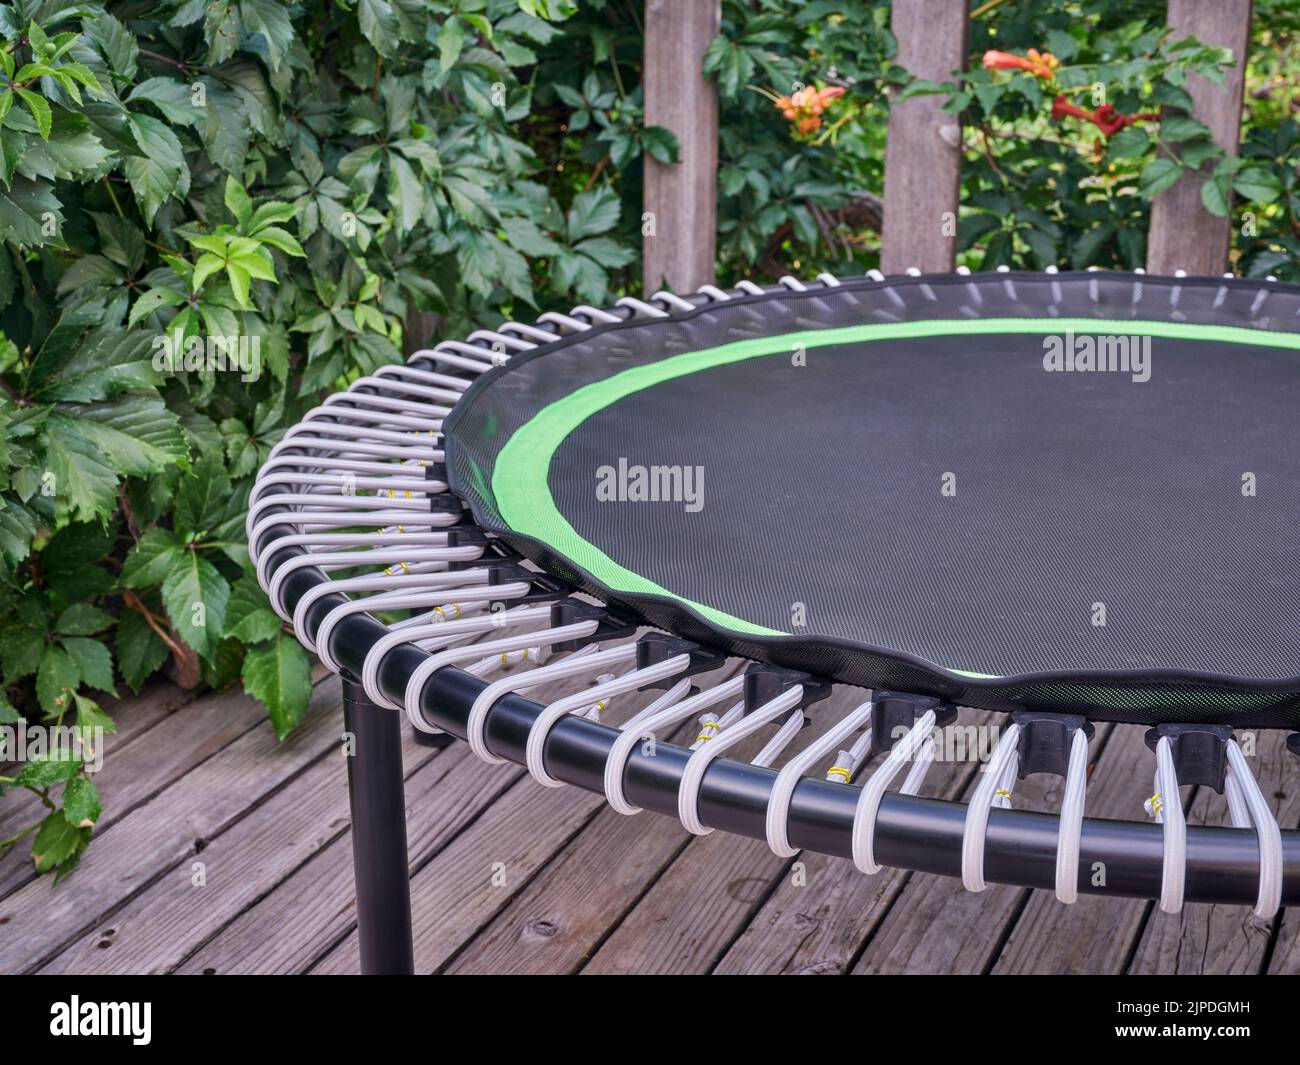 detail of mini trampoline for fitness exercising and rebounding in a backyard patio Stock Photo